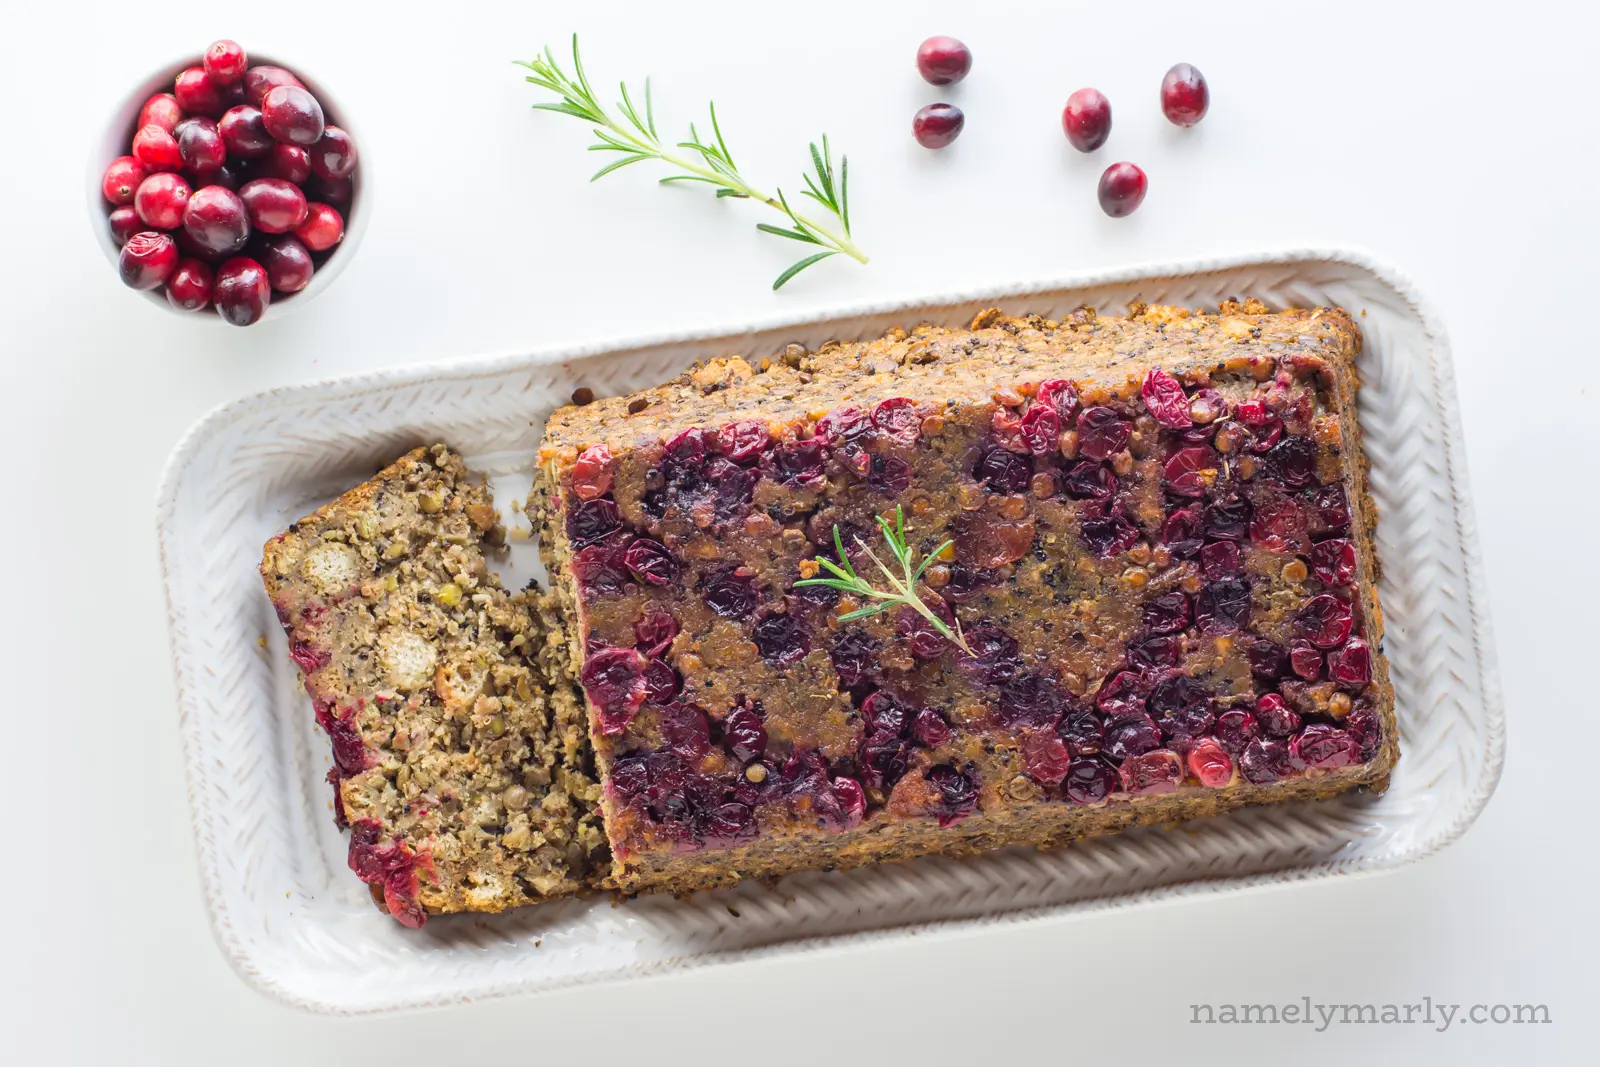 Overhead view of Vegan Holiday Lentil Loaf with stuffing and cranberries